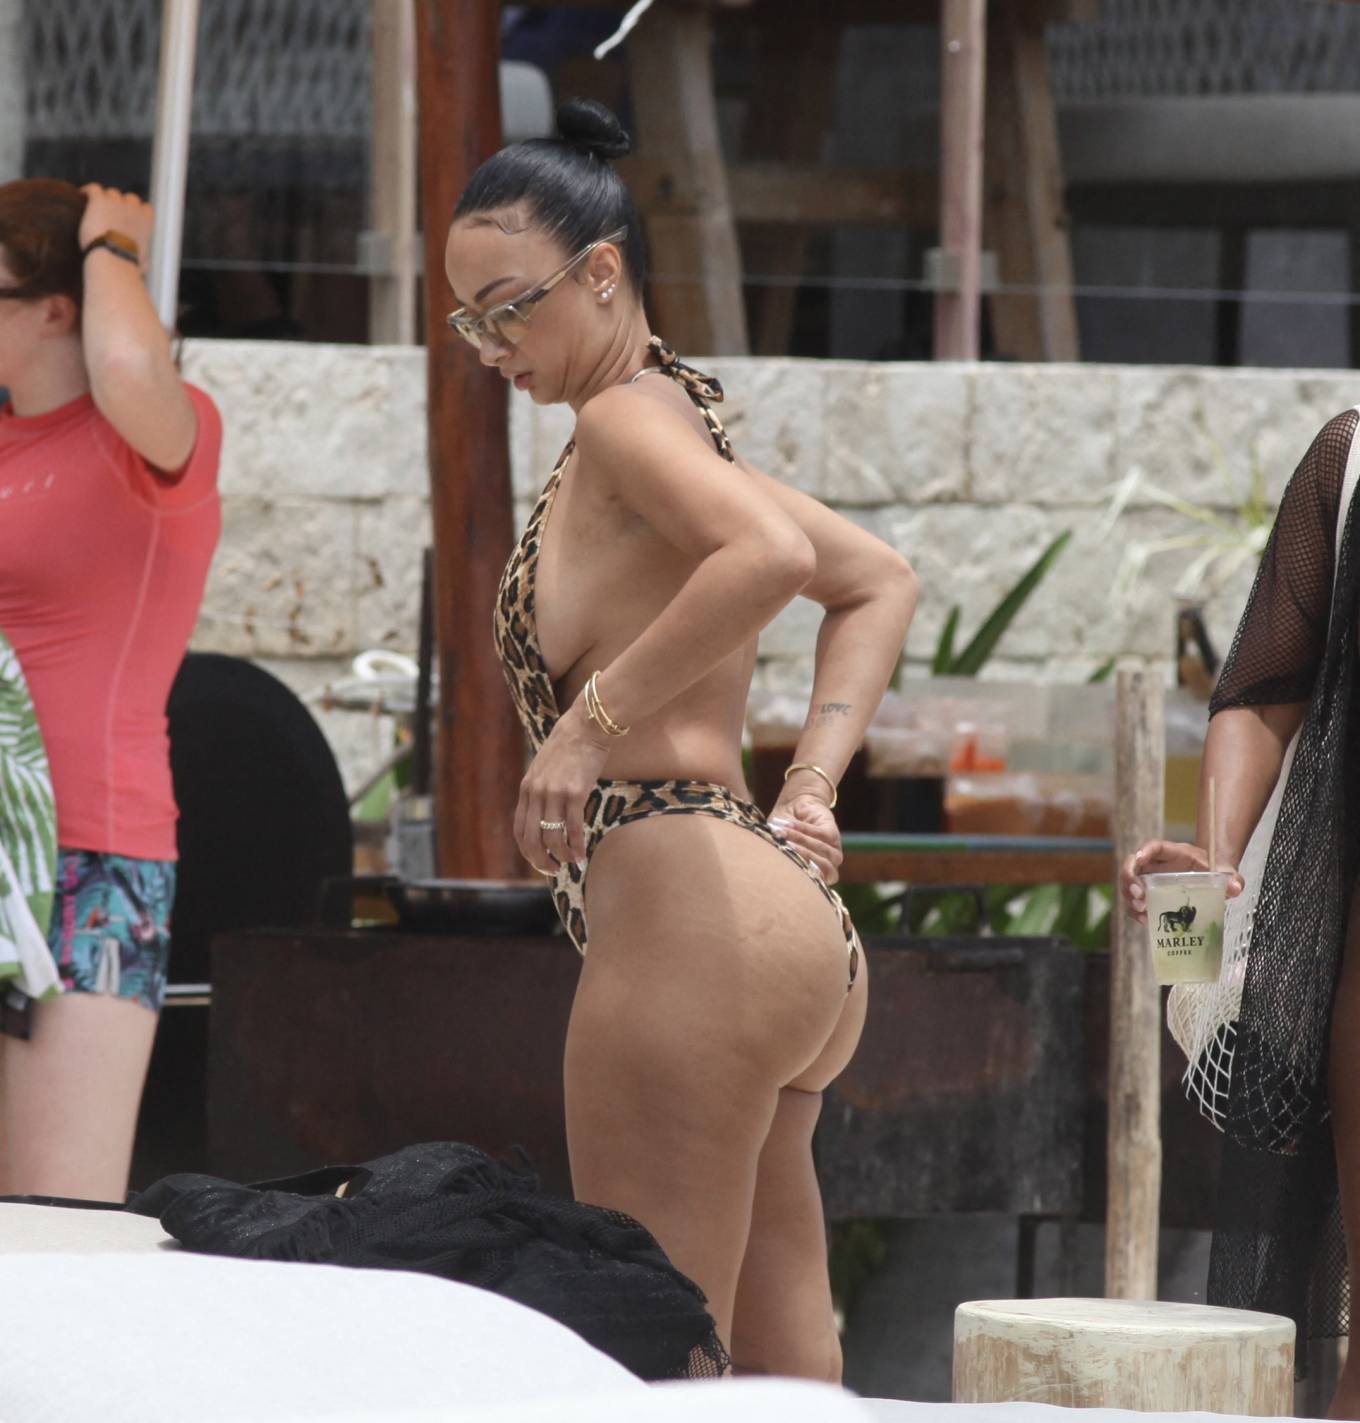 Draya Michelle - Seen at the beach at RoMarley Beach House in Puerto Morelos